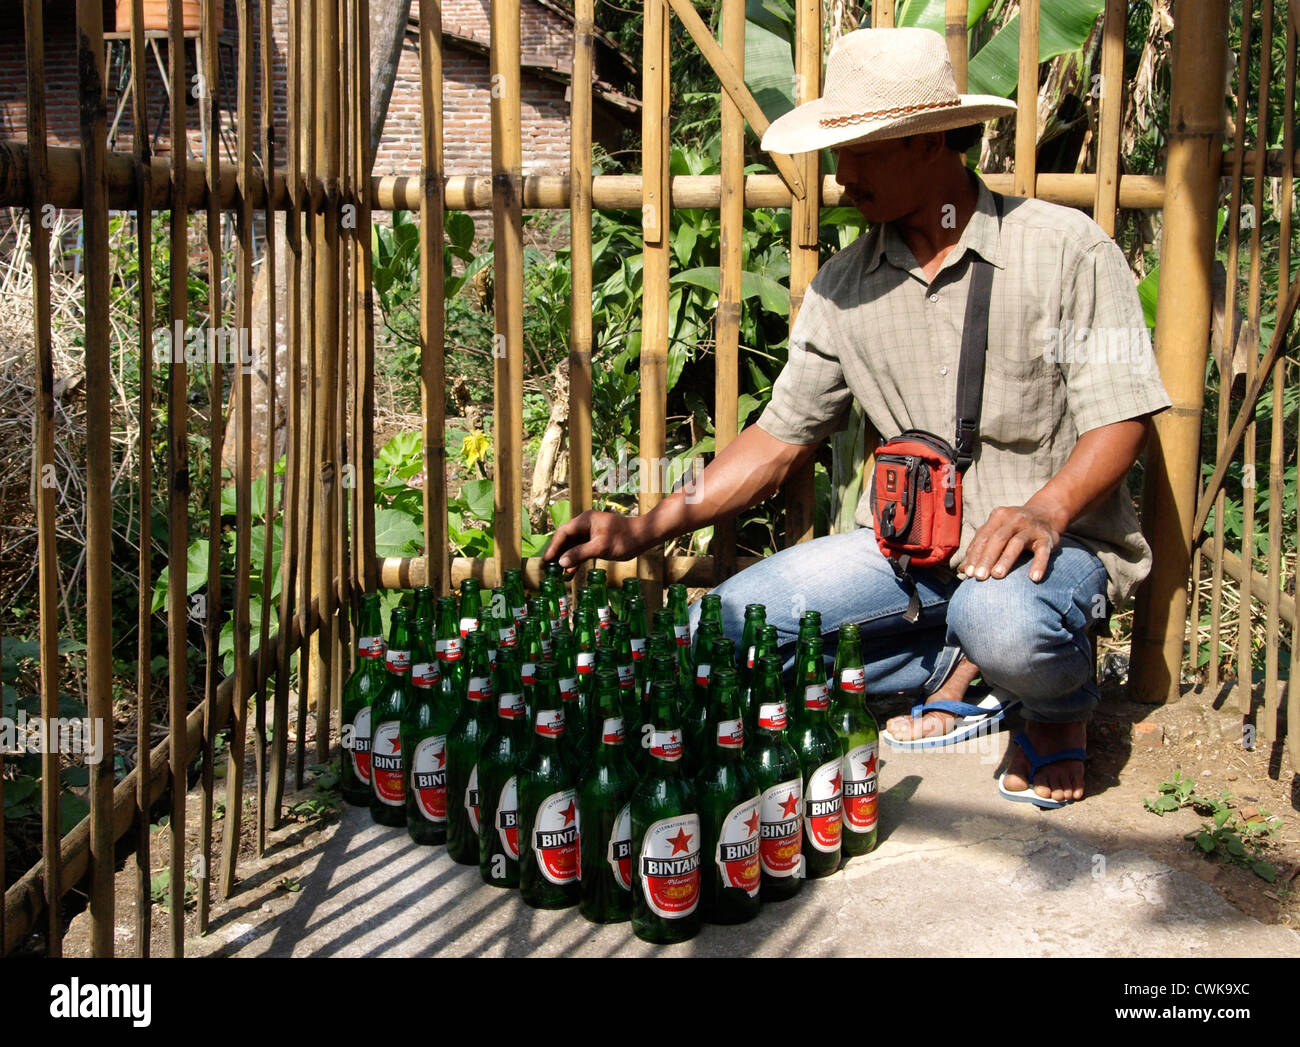 local man with large collection of empty beer bottles for recycling Stock Photo